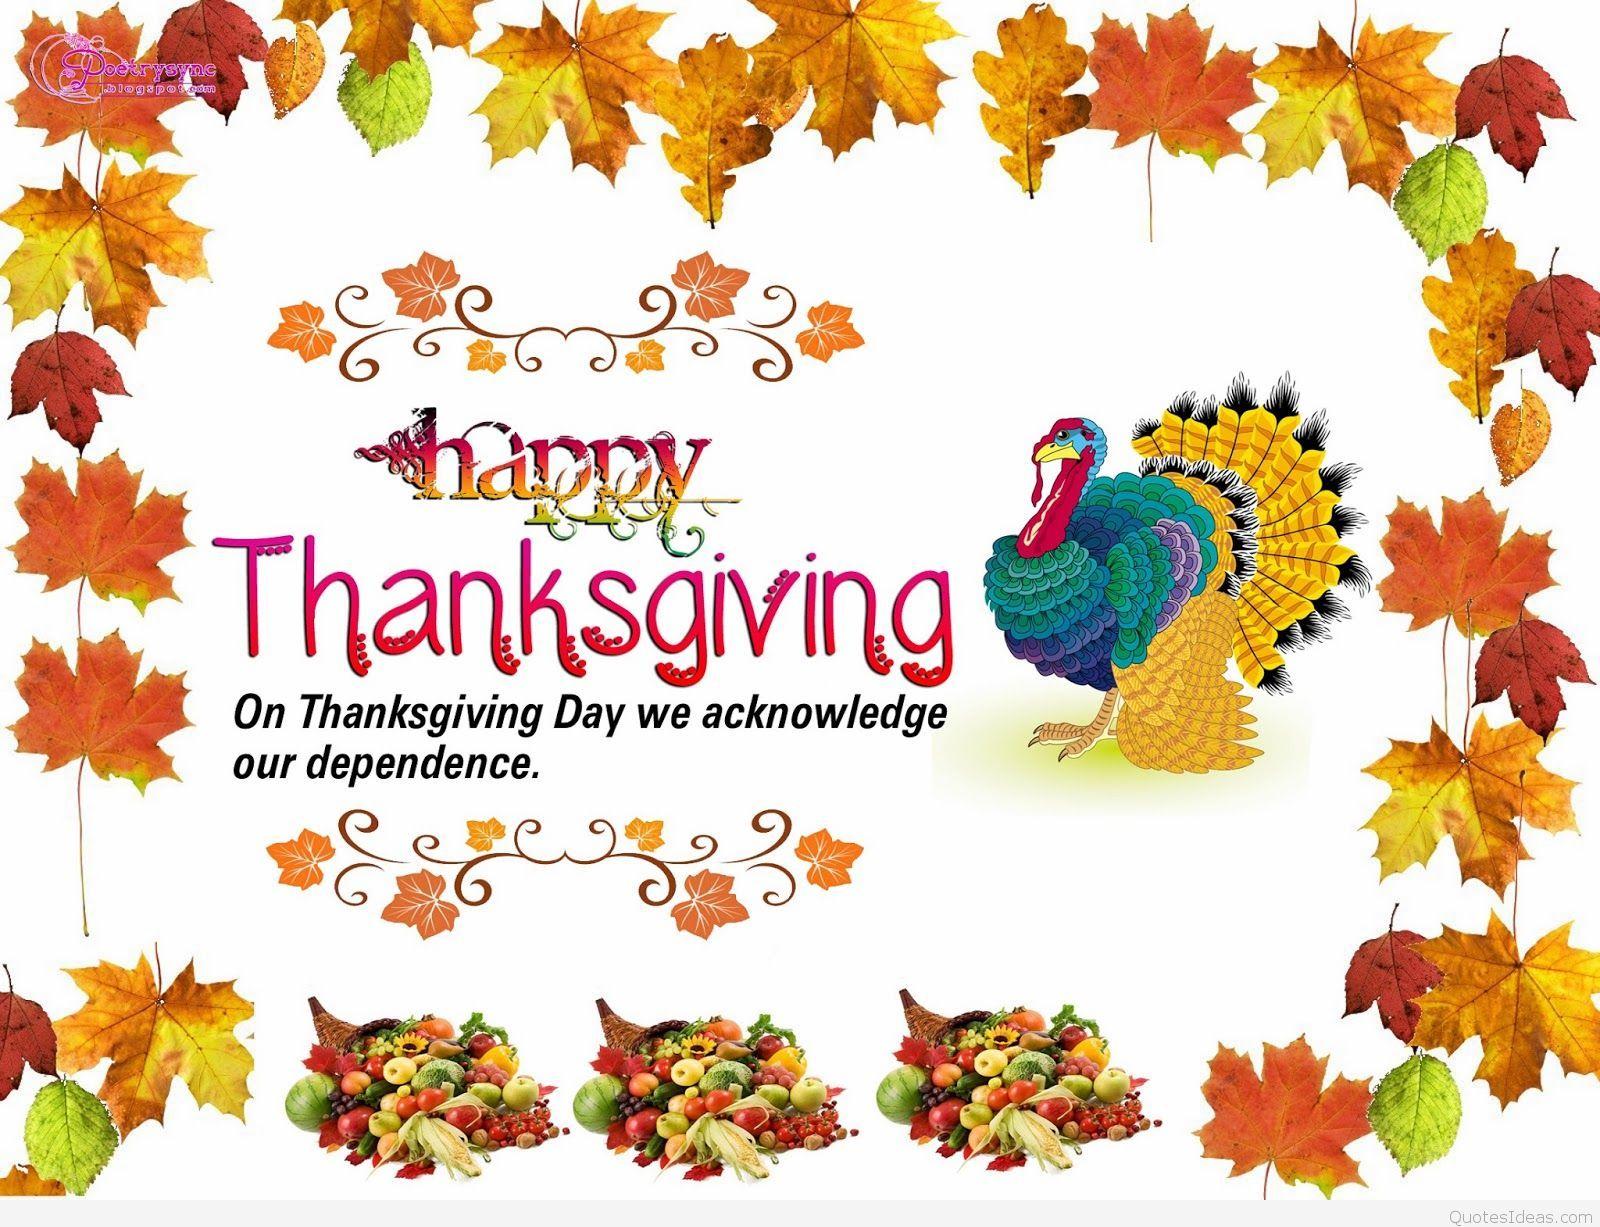 Awesome Happy Thanksgiving quotes with cards pics